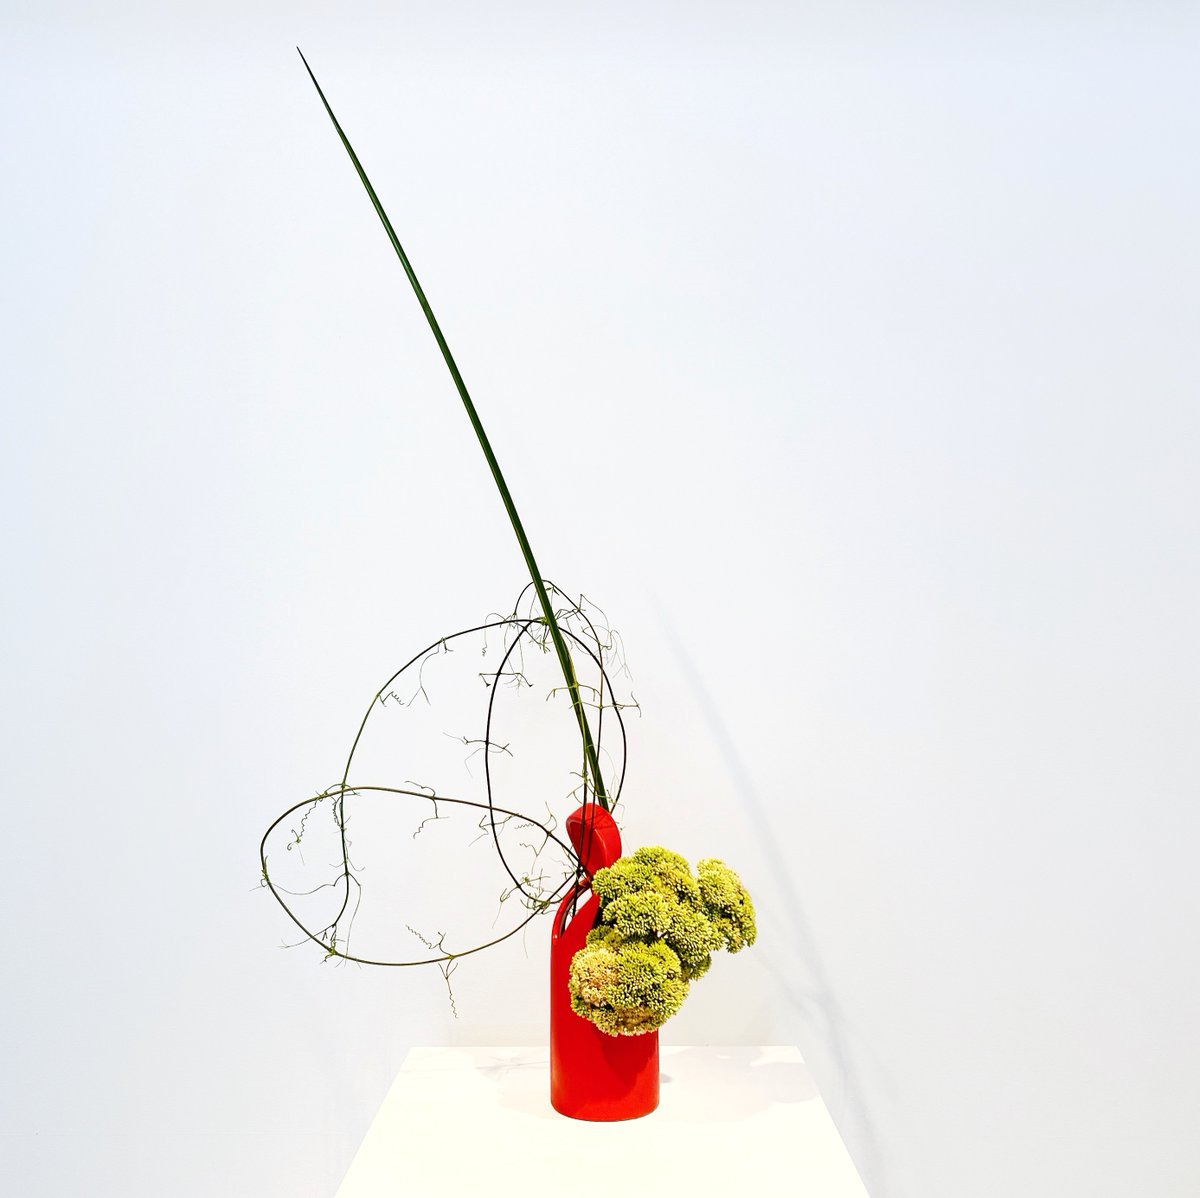 Janet Killoran's delicate ikebana arrangement uses sedum, honeysuckle vine and palm frond. View it at GOMA this weekend 🍂〰️🍃

The Gallery is open 10.00am – 5.00pm daily. 

#IkebanaFriday #MuseumBouquet #QAGOMA